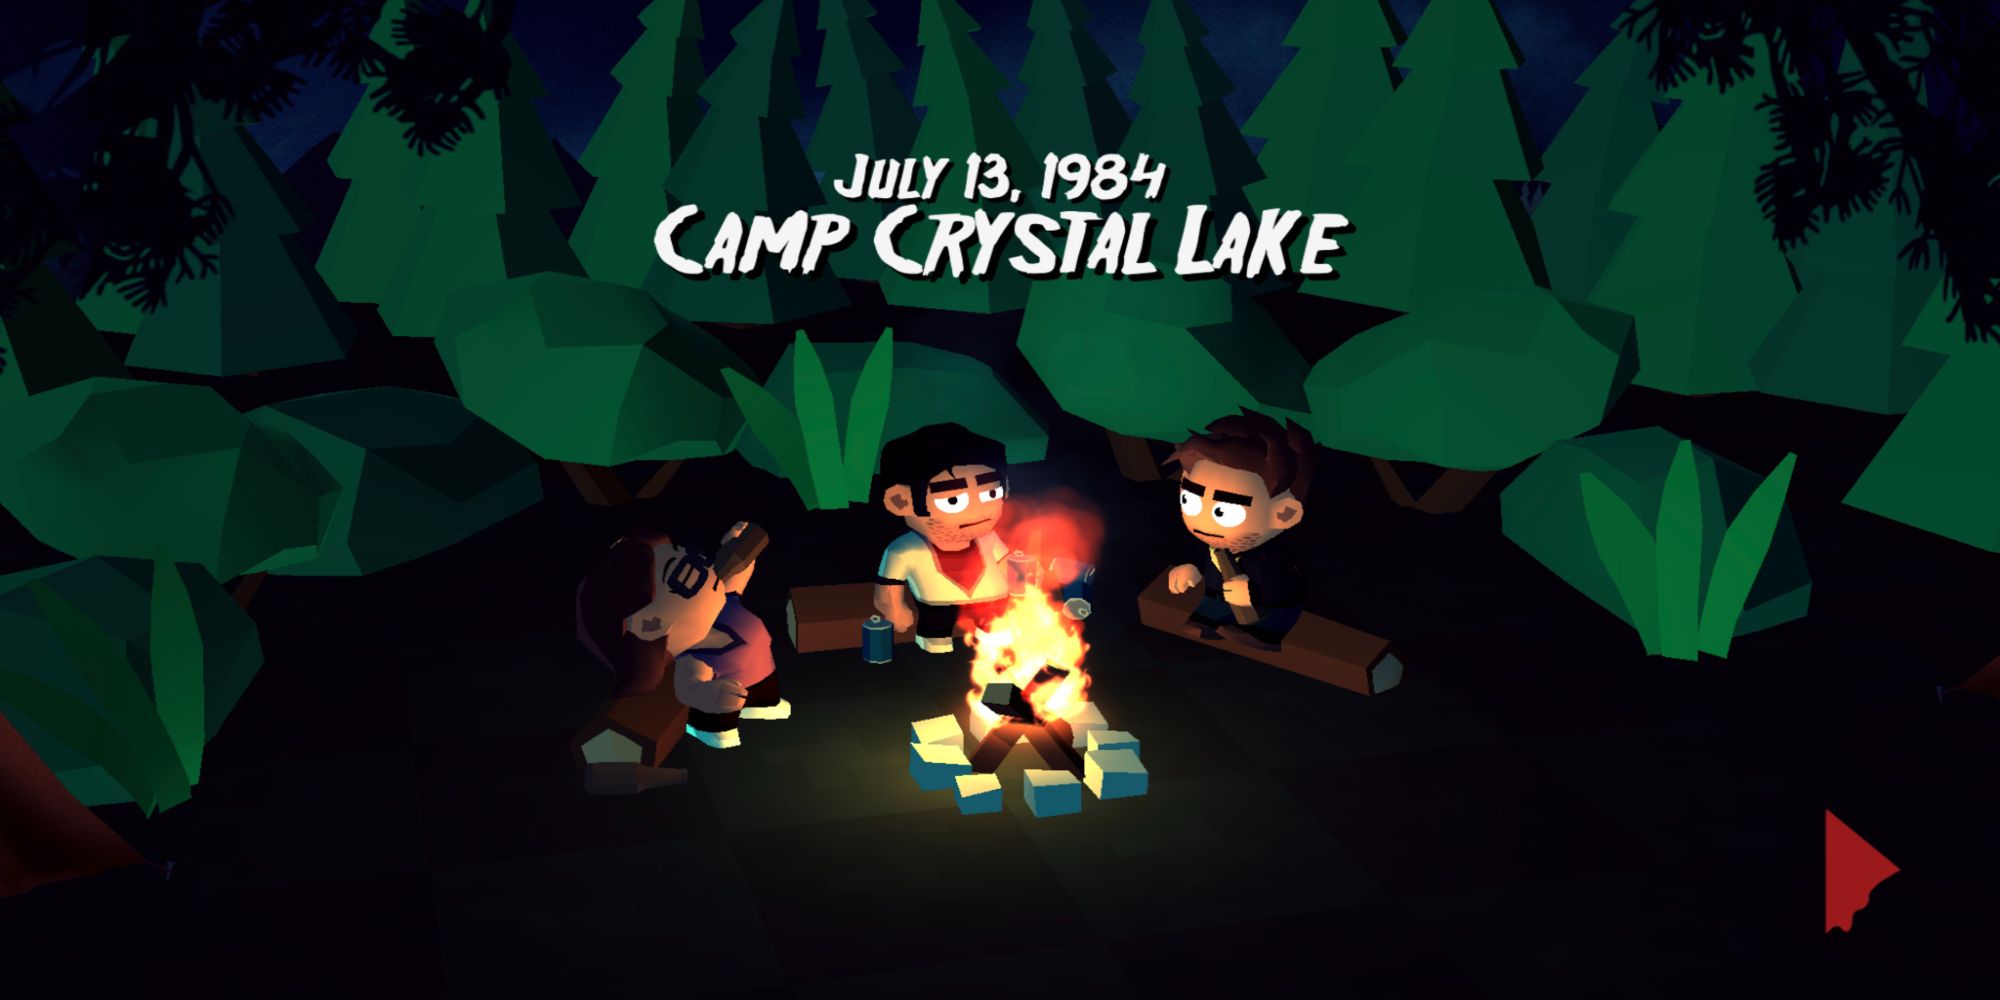 Camp Crystal Lake From Friday The 13th Killer Puzzle best free horror games on steam